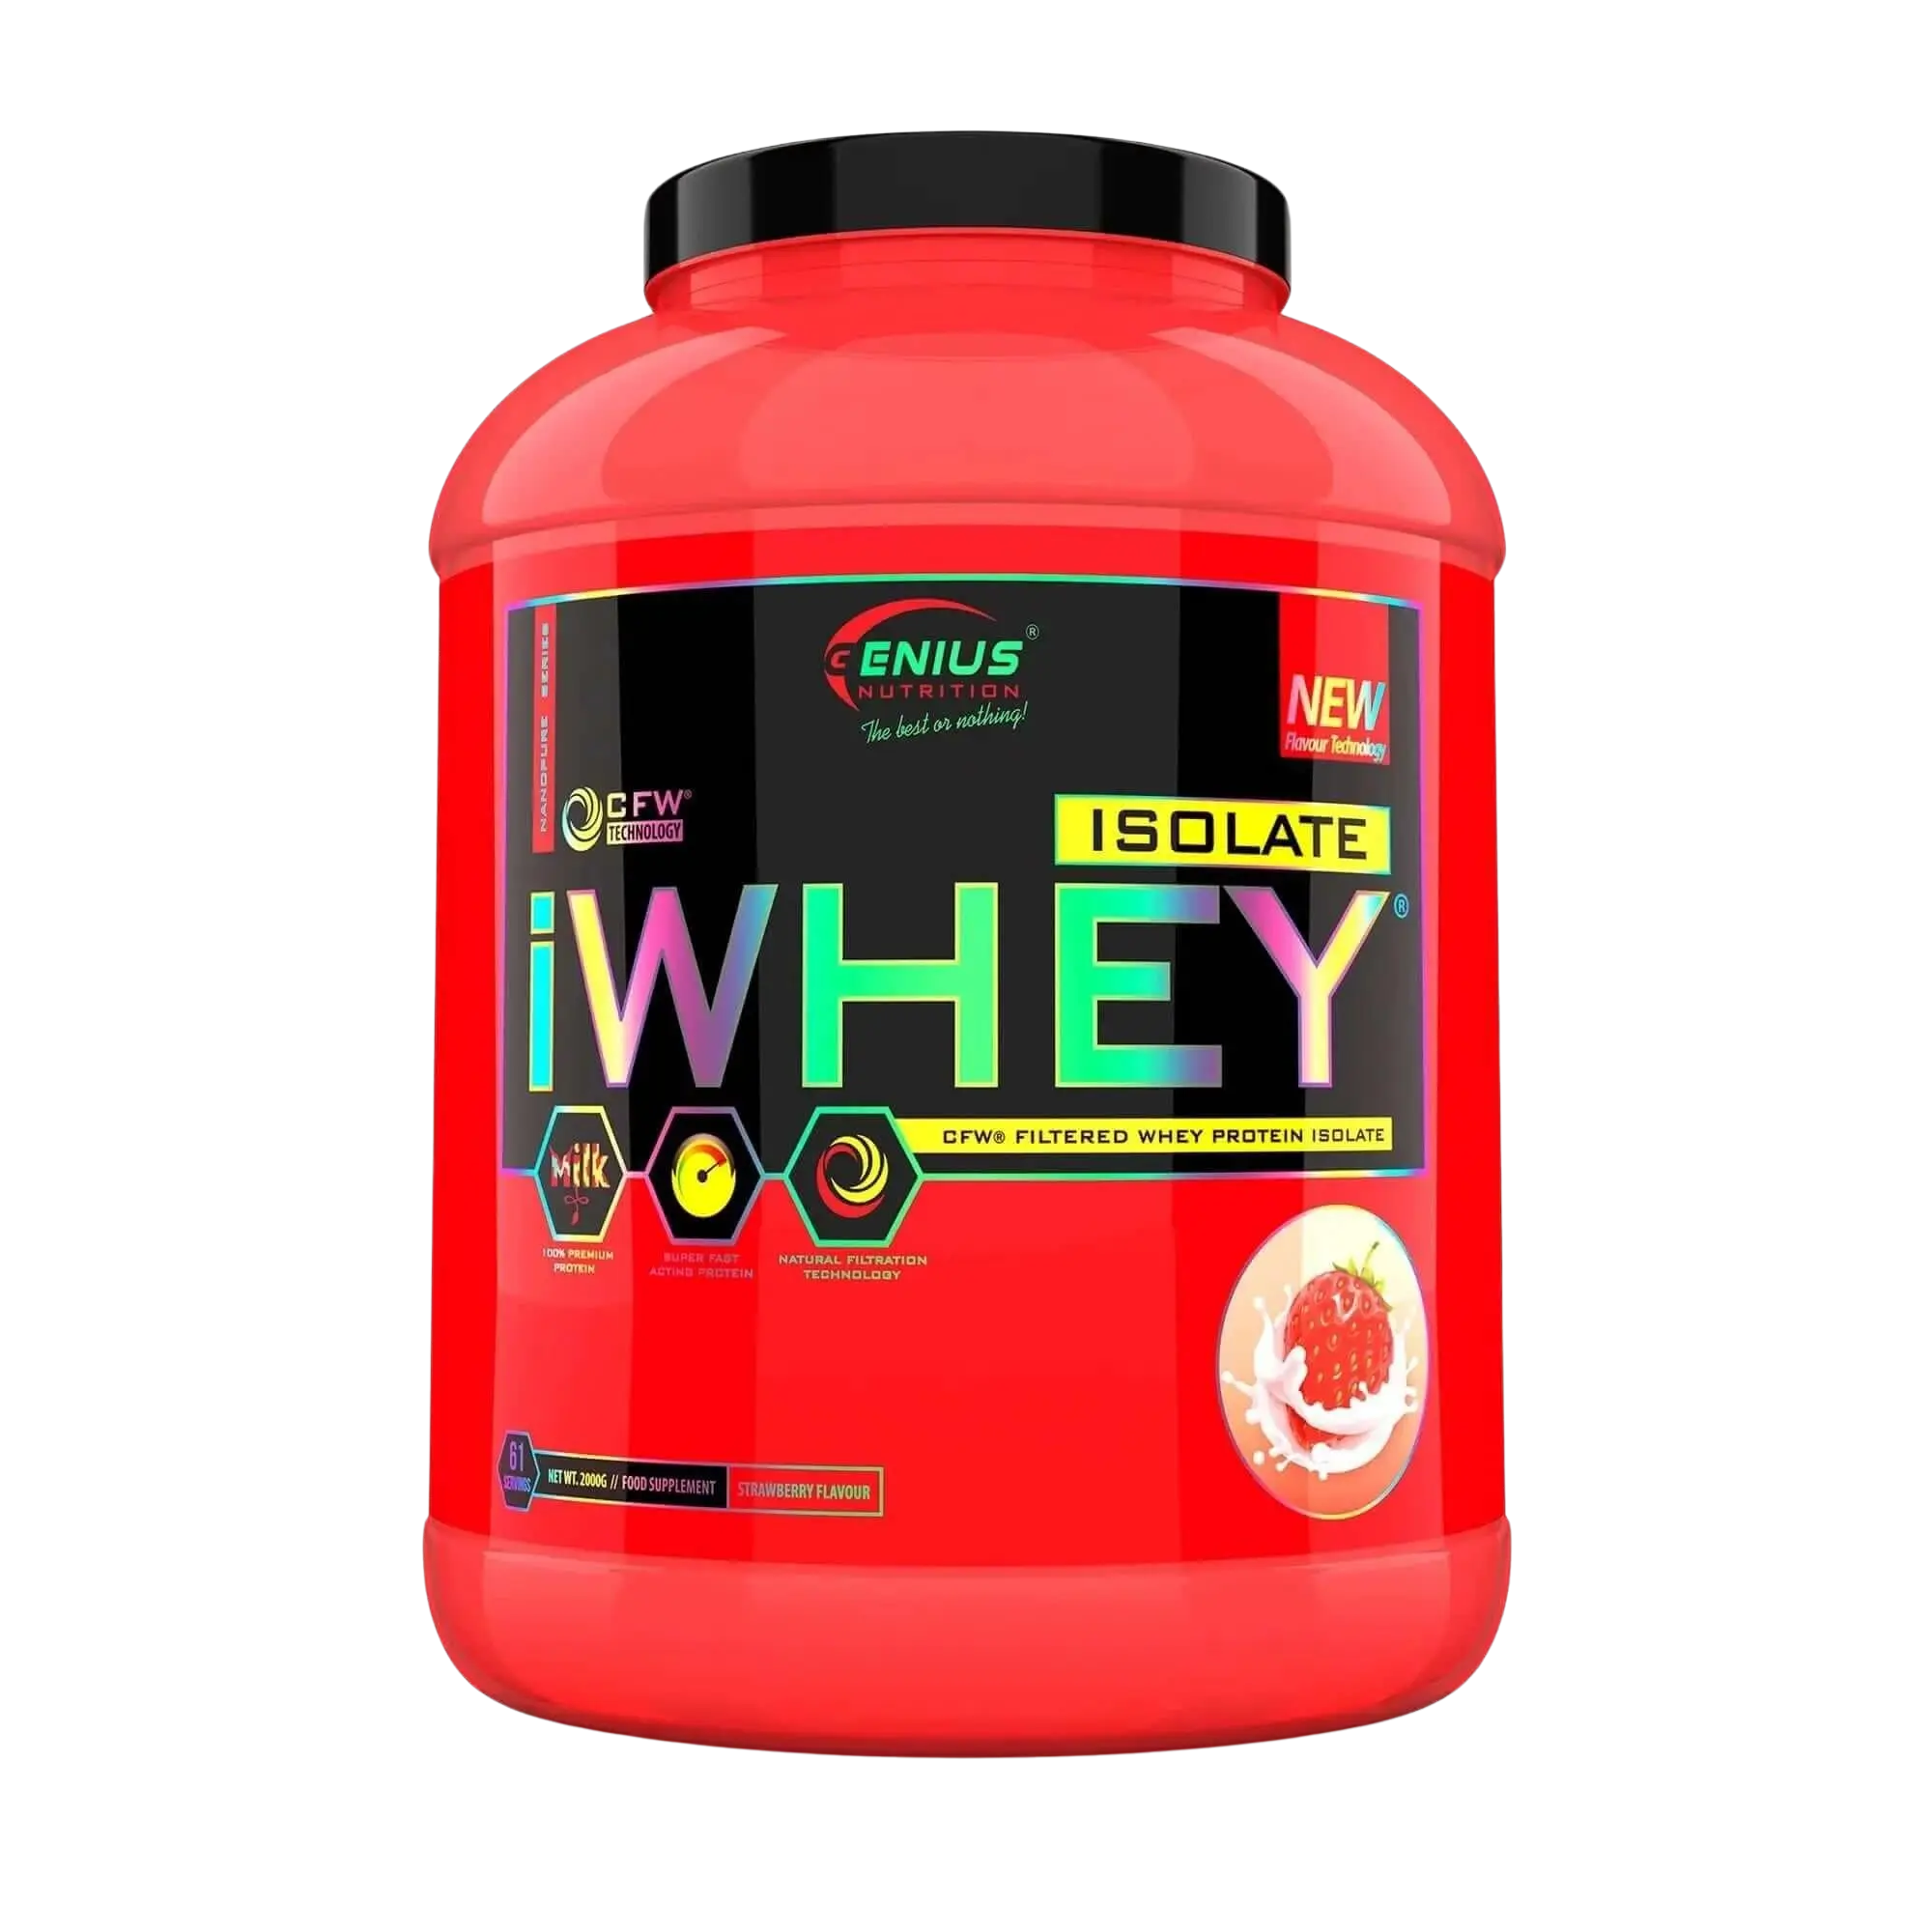 whey iwhey isolate protein Fraise 2000g genius nutrition